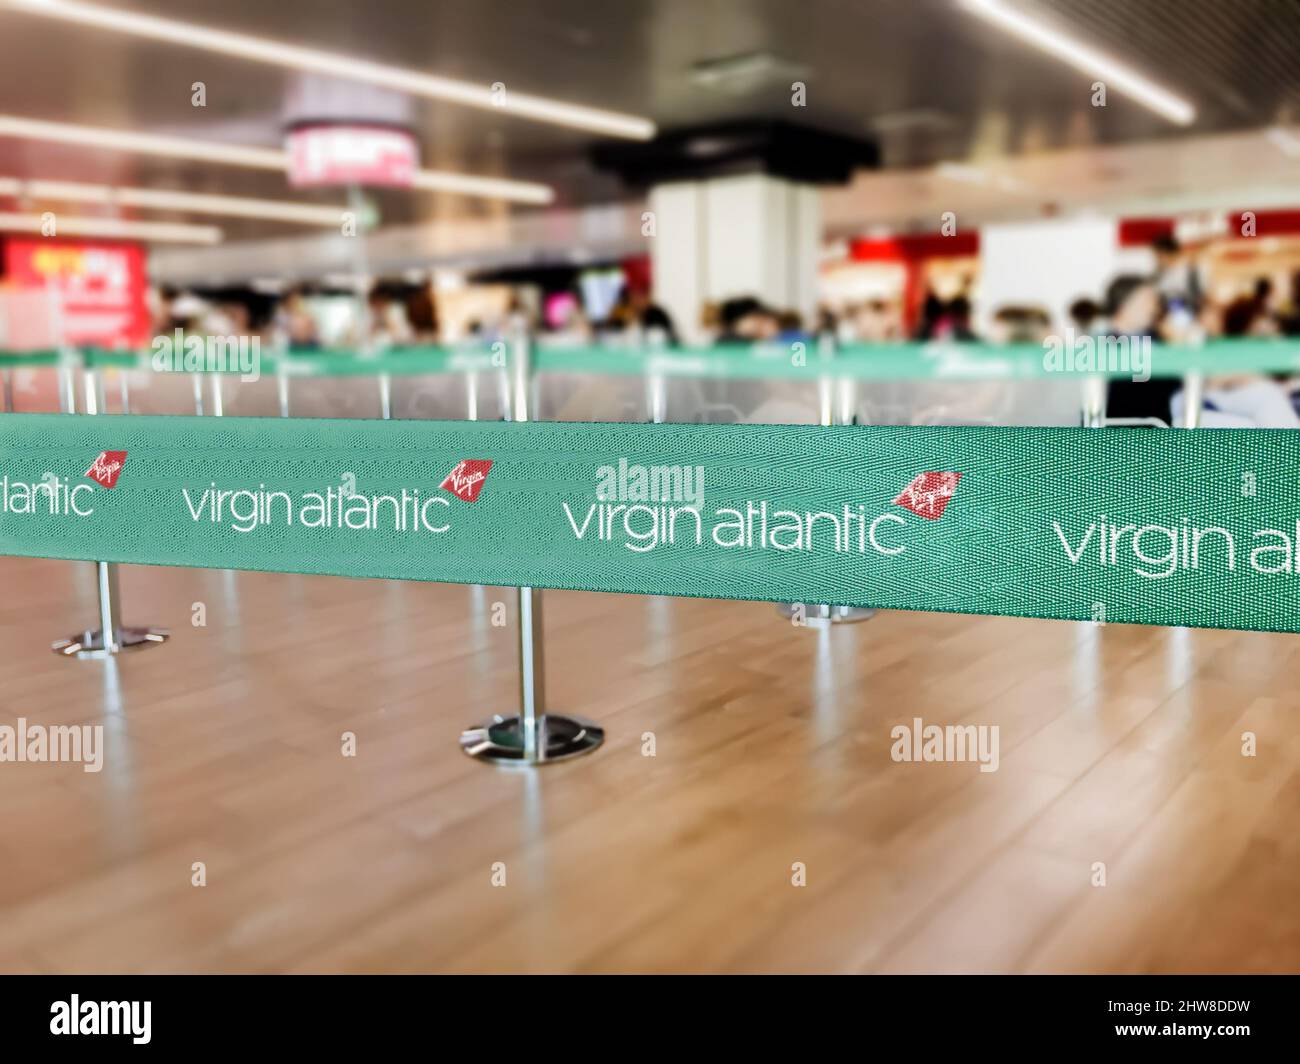 London, UK, July 2019: Green belt barrier with white Virgin Atlantic airlines logo. Virgin Atlantic is a British airline. Travel and airport security Stock Photo